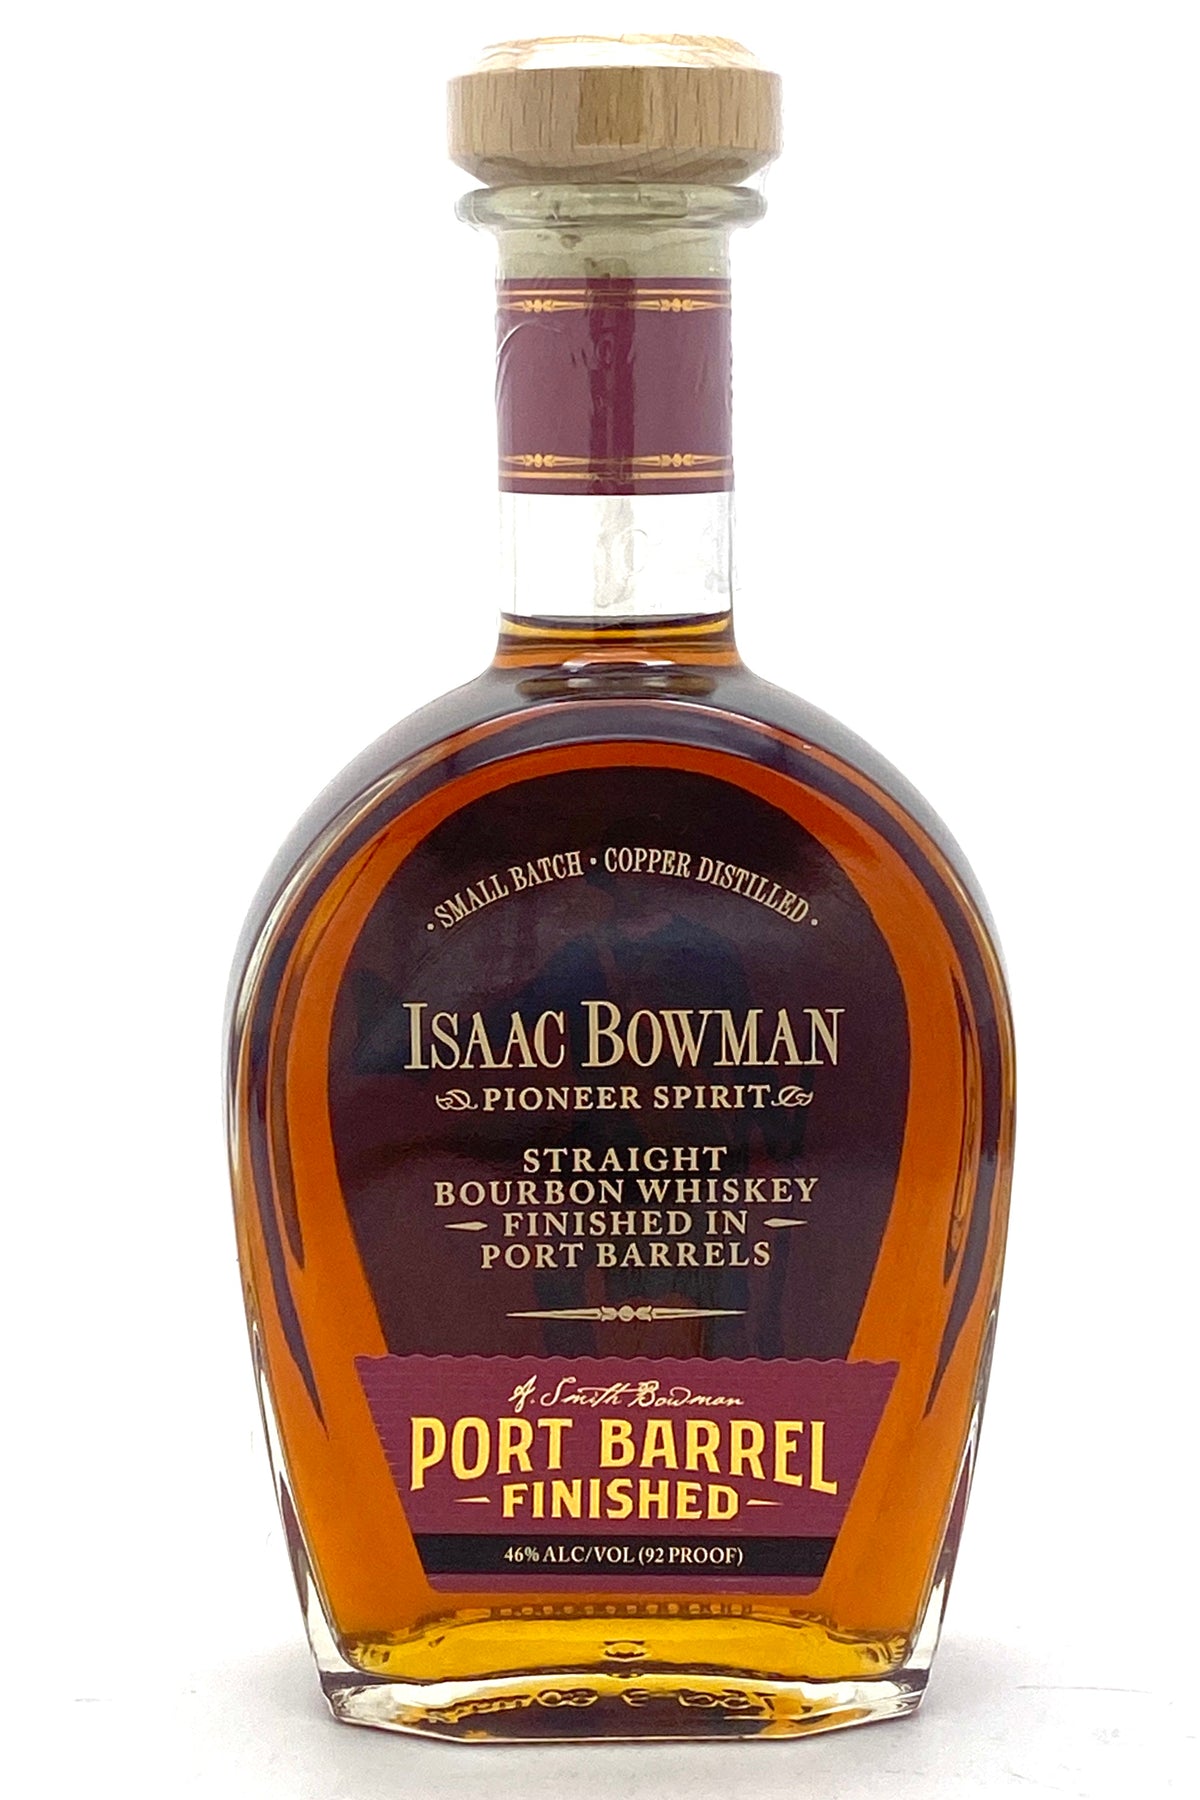 Isaac Bowman Pioneer Spirit Straight Bourbon Whiskey Finished in Port Barrels